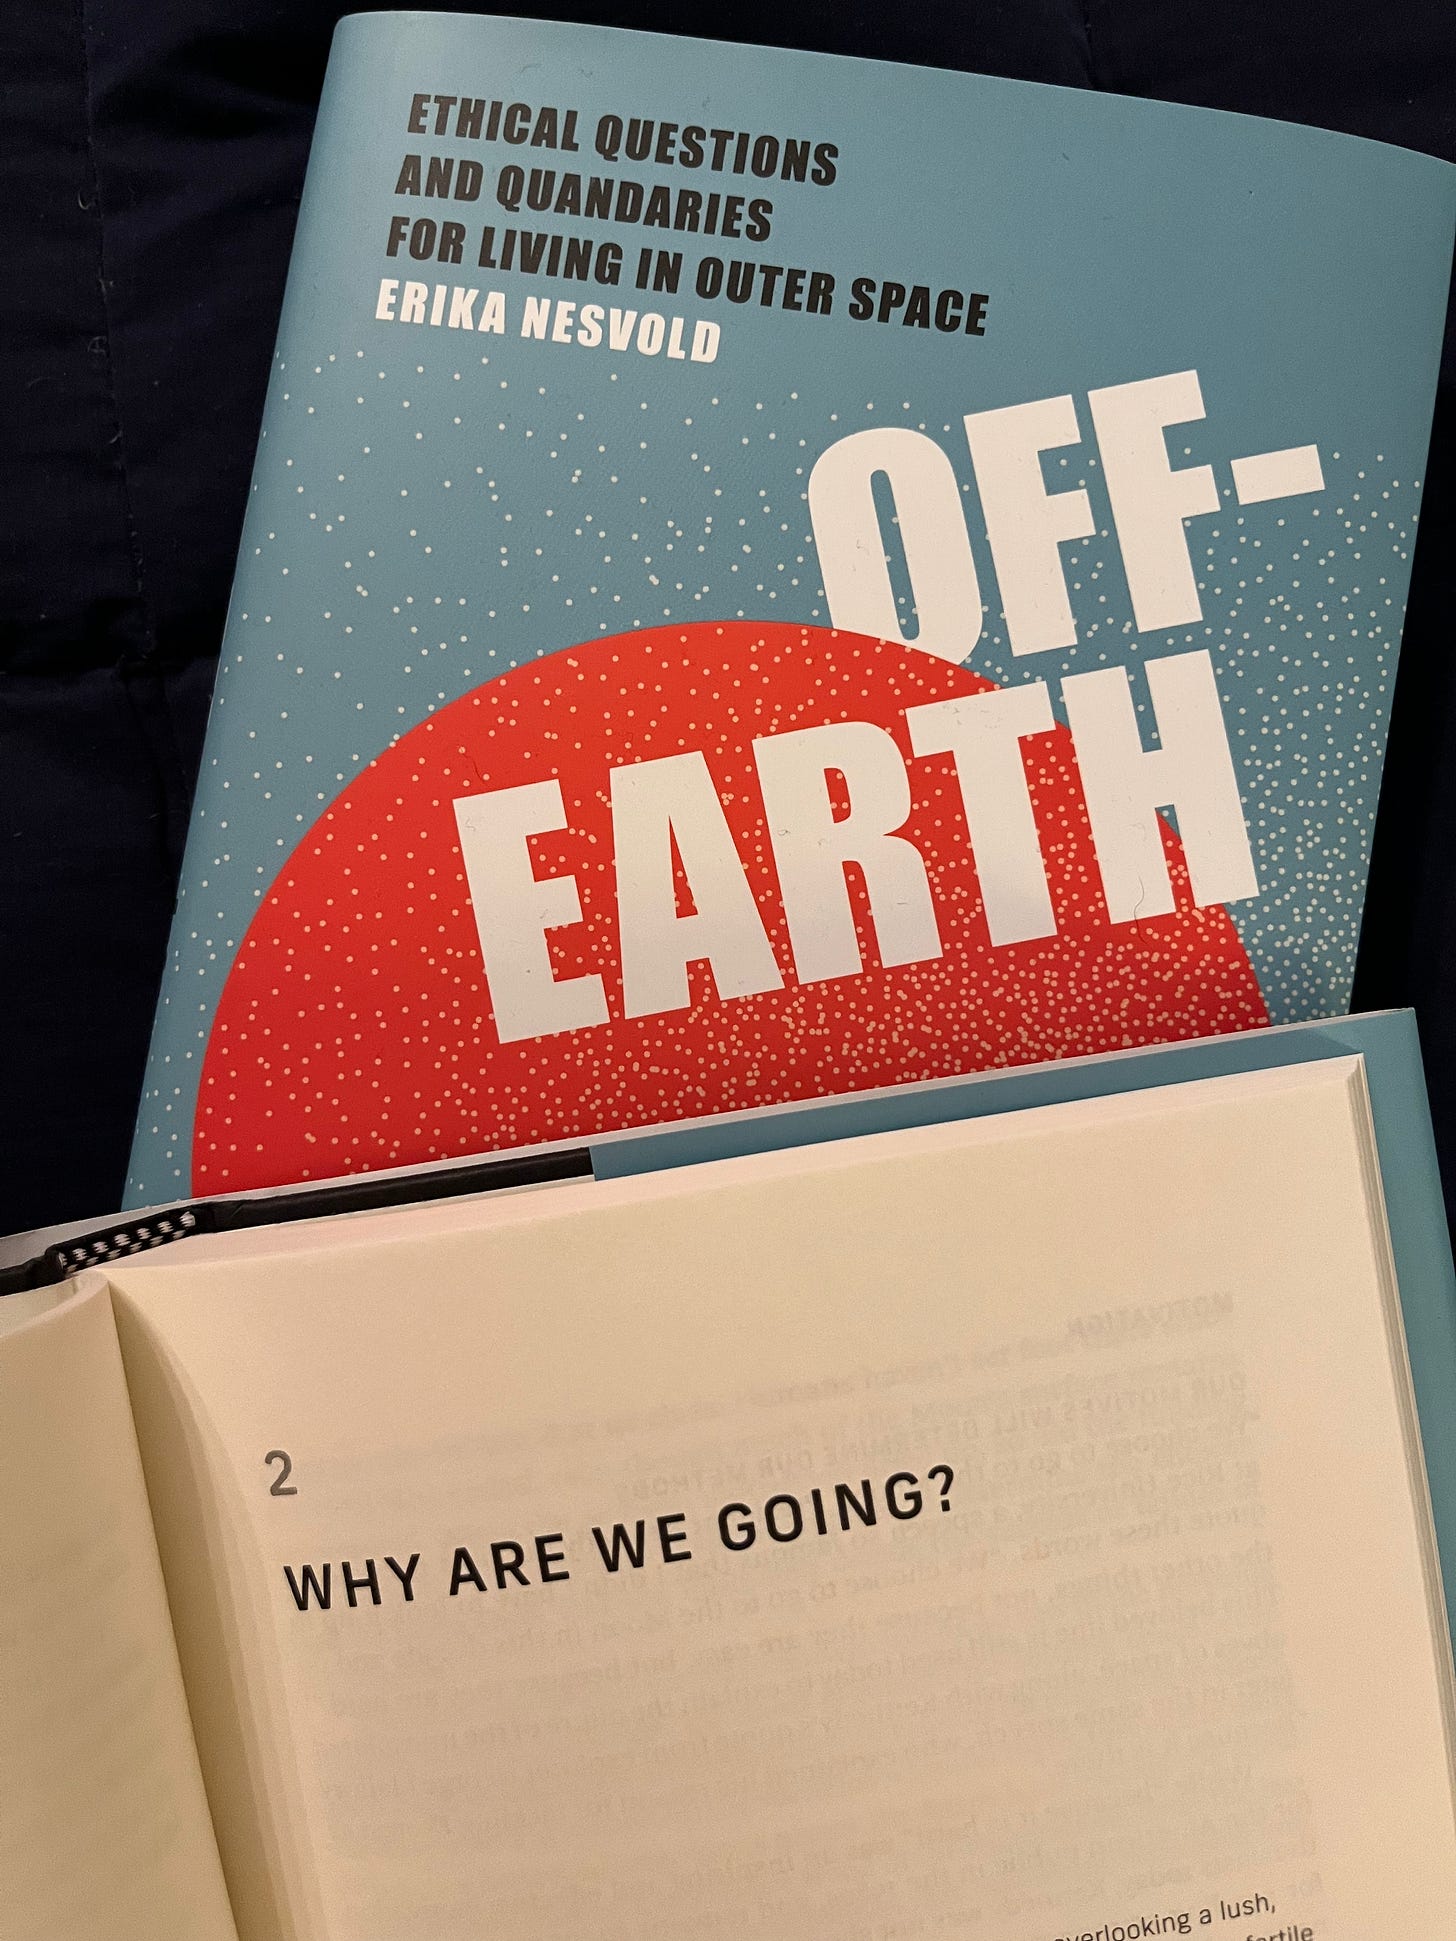 A photo of two copies of Off-Earth. The top is open to Chapter 2: Why Are We Going?. The other is lying underneath the first, showing off the cover.